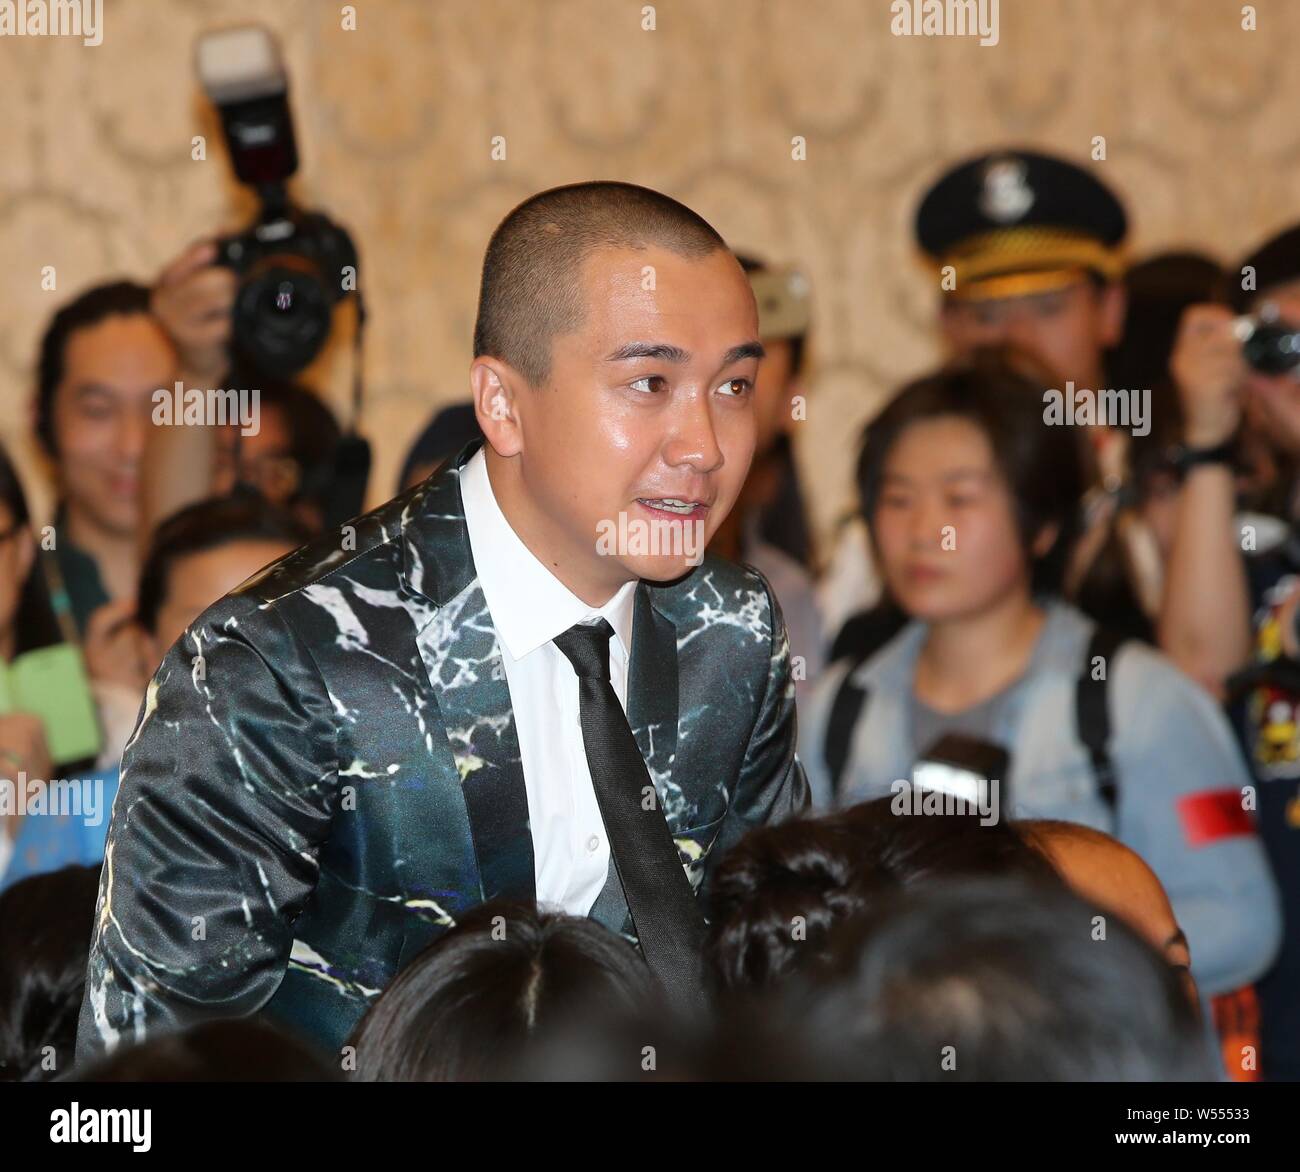 FILE--Chinese actor Zhai Tianlin attends a press conference for new TV  series "White Deer Plain" in Xi'an city, northwest China's Shaanxi province  Stock Photo - Alamy